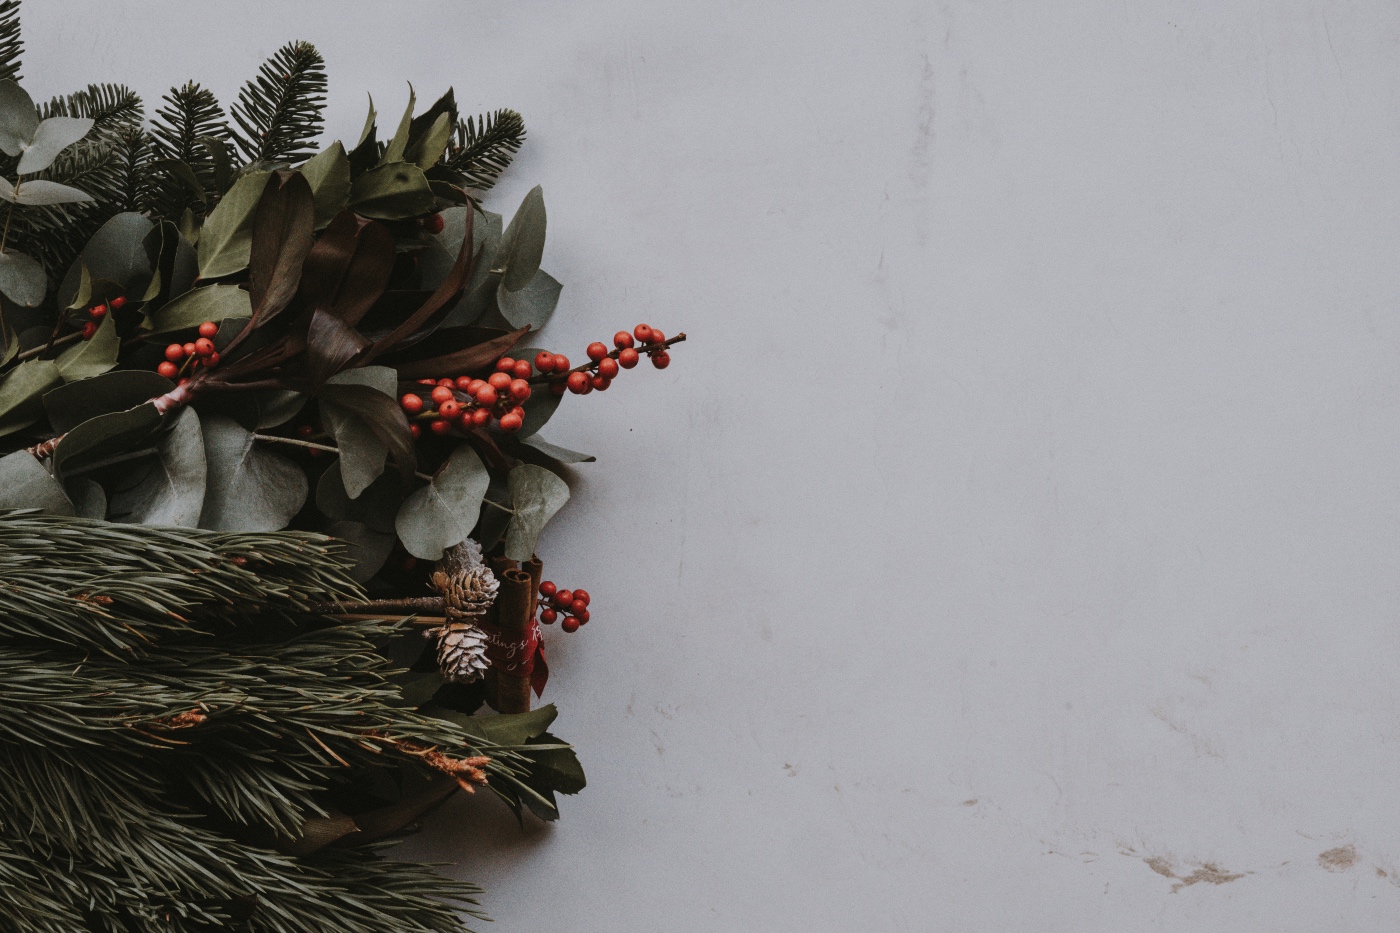 pinecones, pine, and greens to add to a winter bouquet of flowers